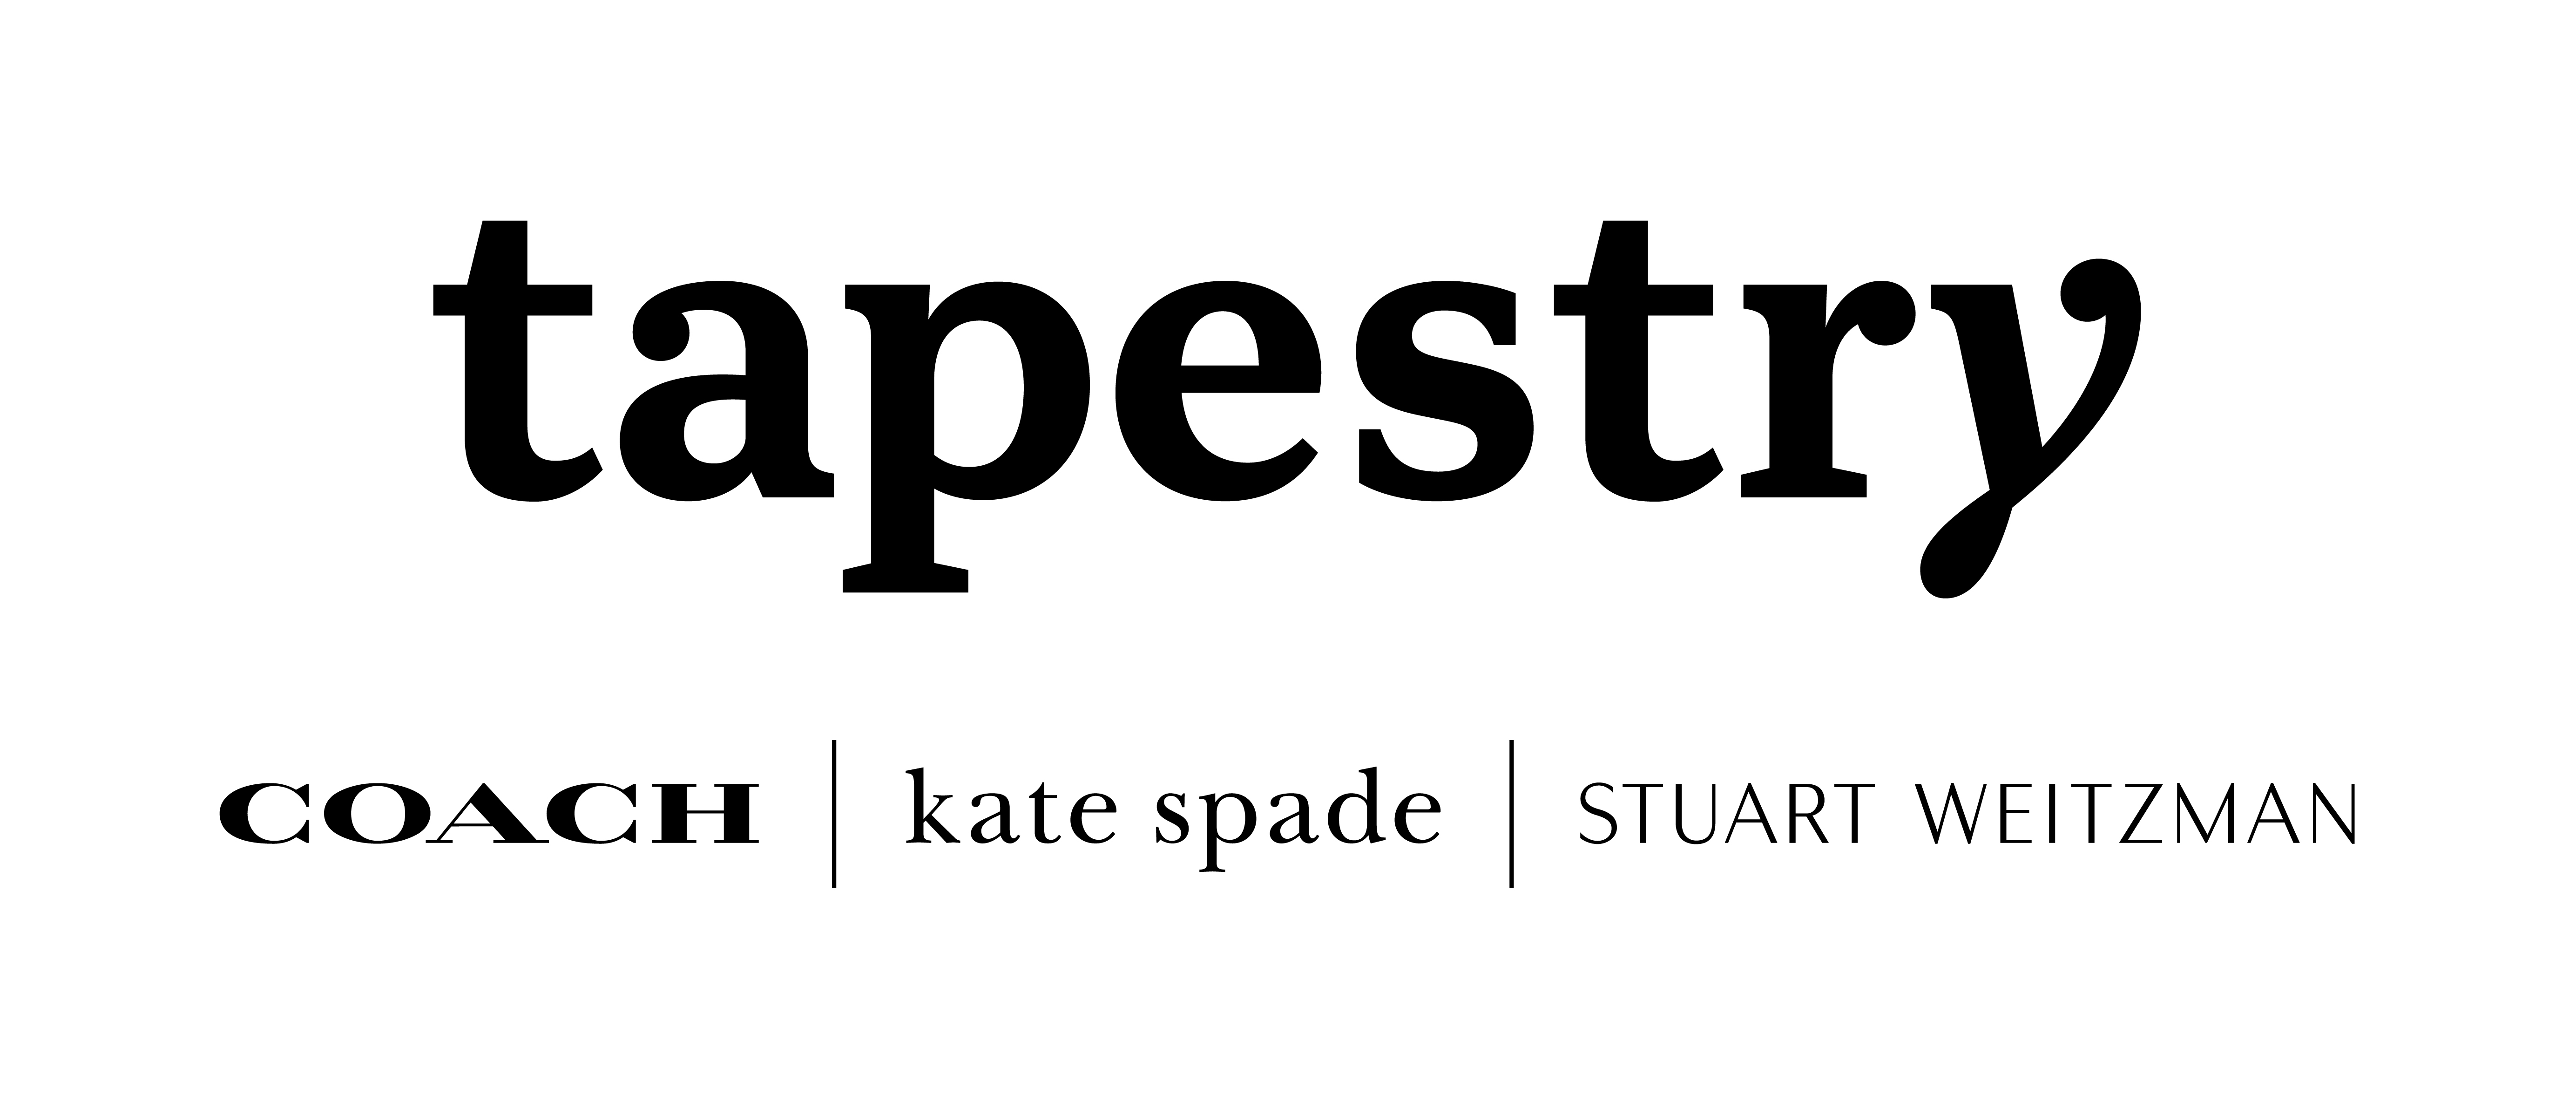 Working at Tapestry Inc., Coach, kate spade new york, Stuart Weitzman